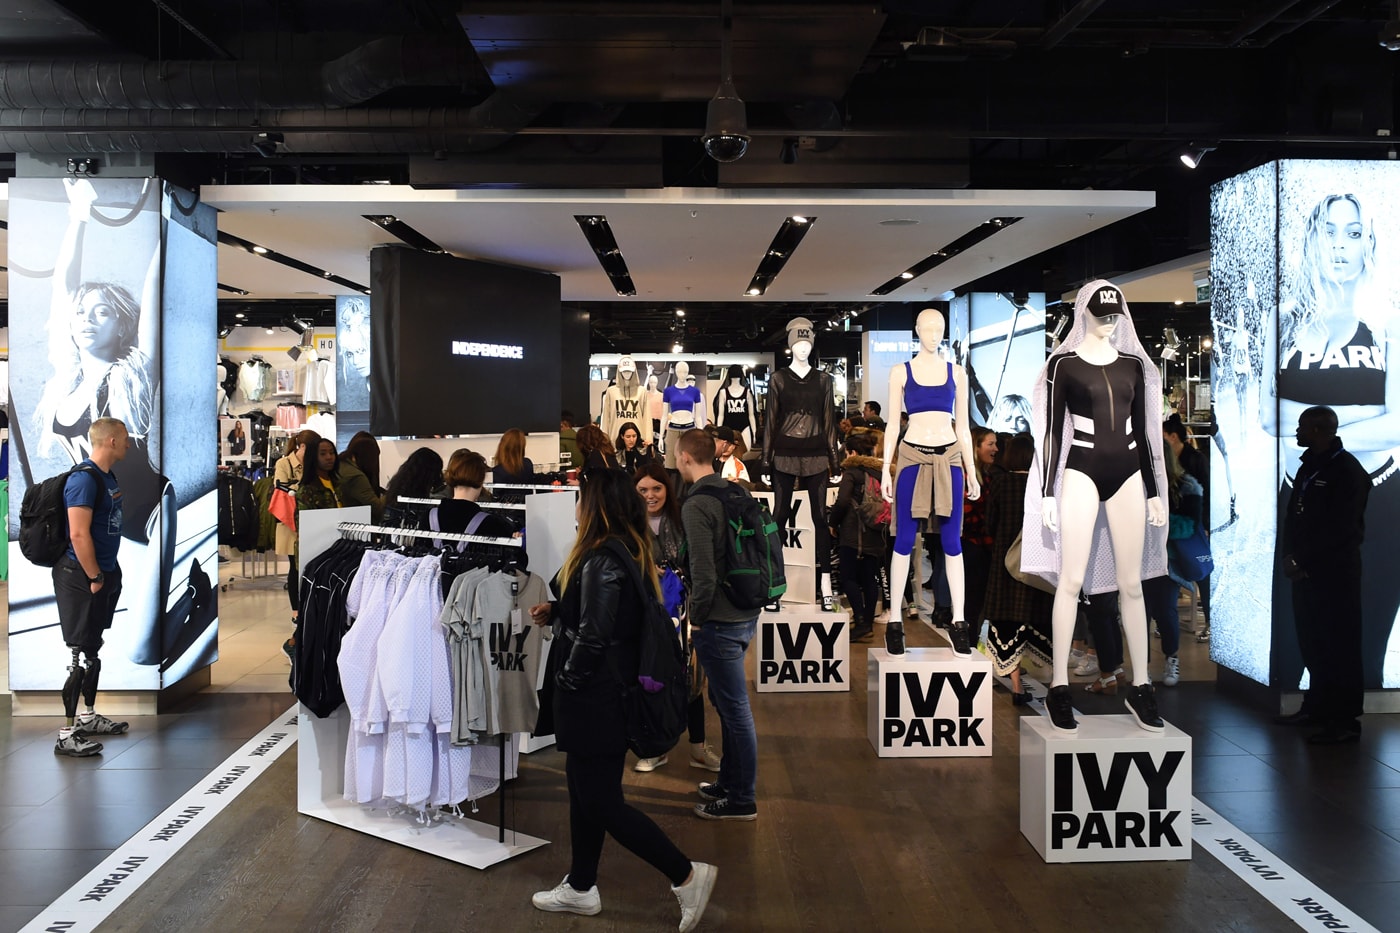 Beyoncé's Ivy Park Clothing Line With Adidas Is Falling Short Of